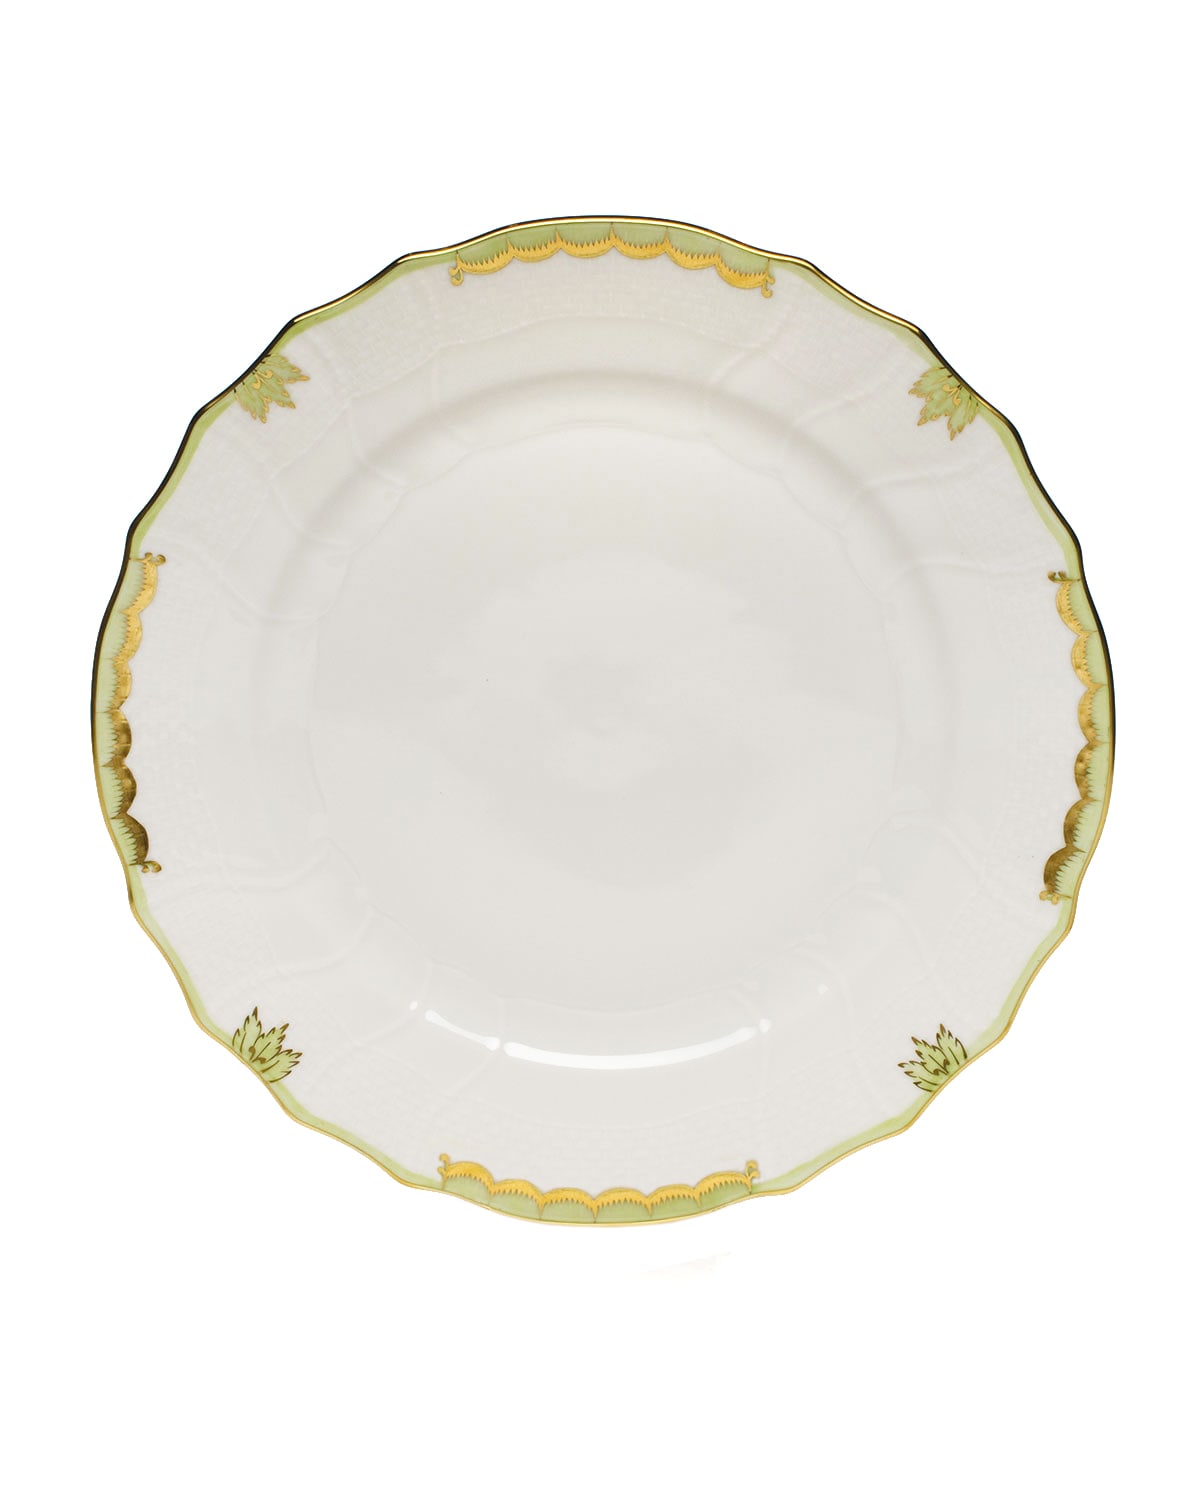 Herend Princess Victoria Dinner Plate In Green